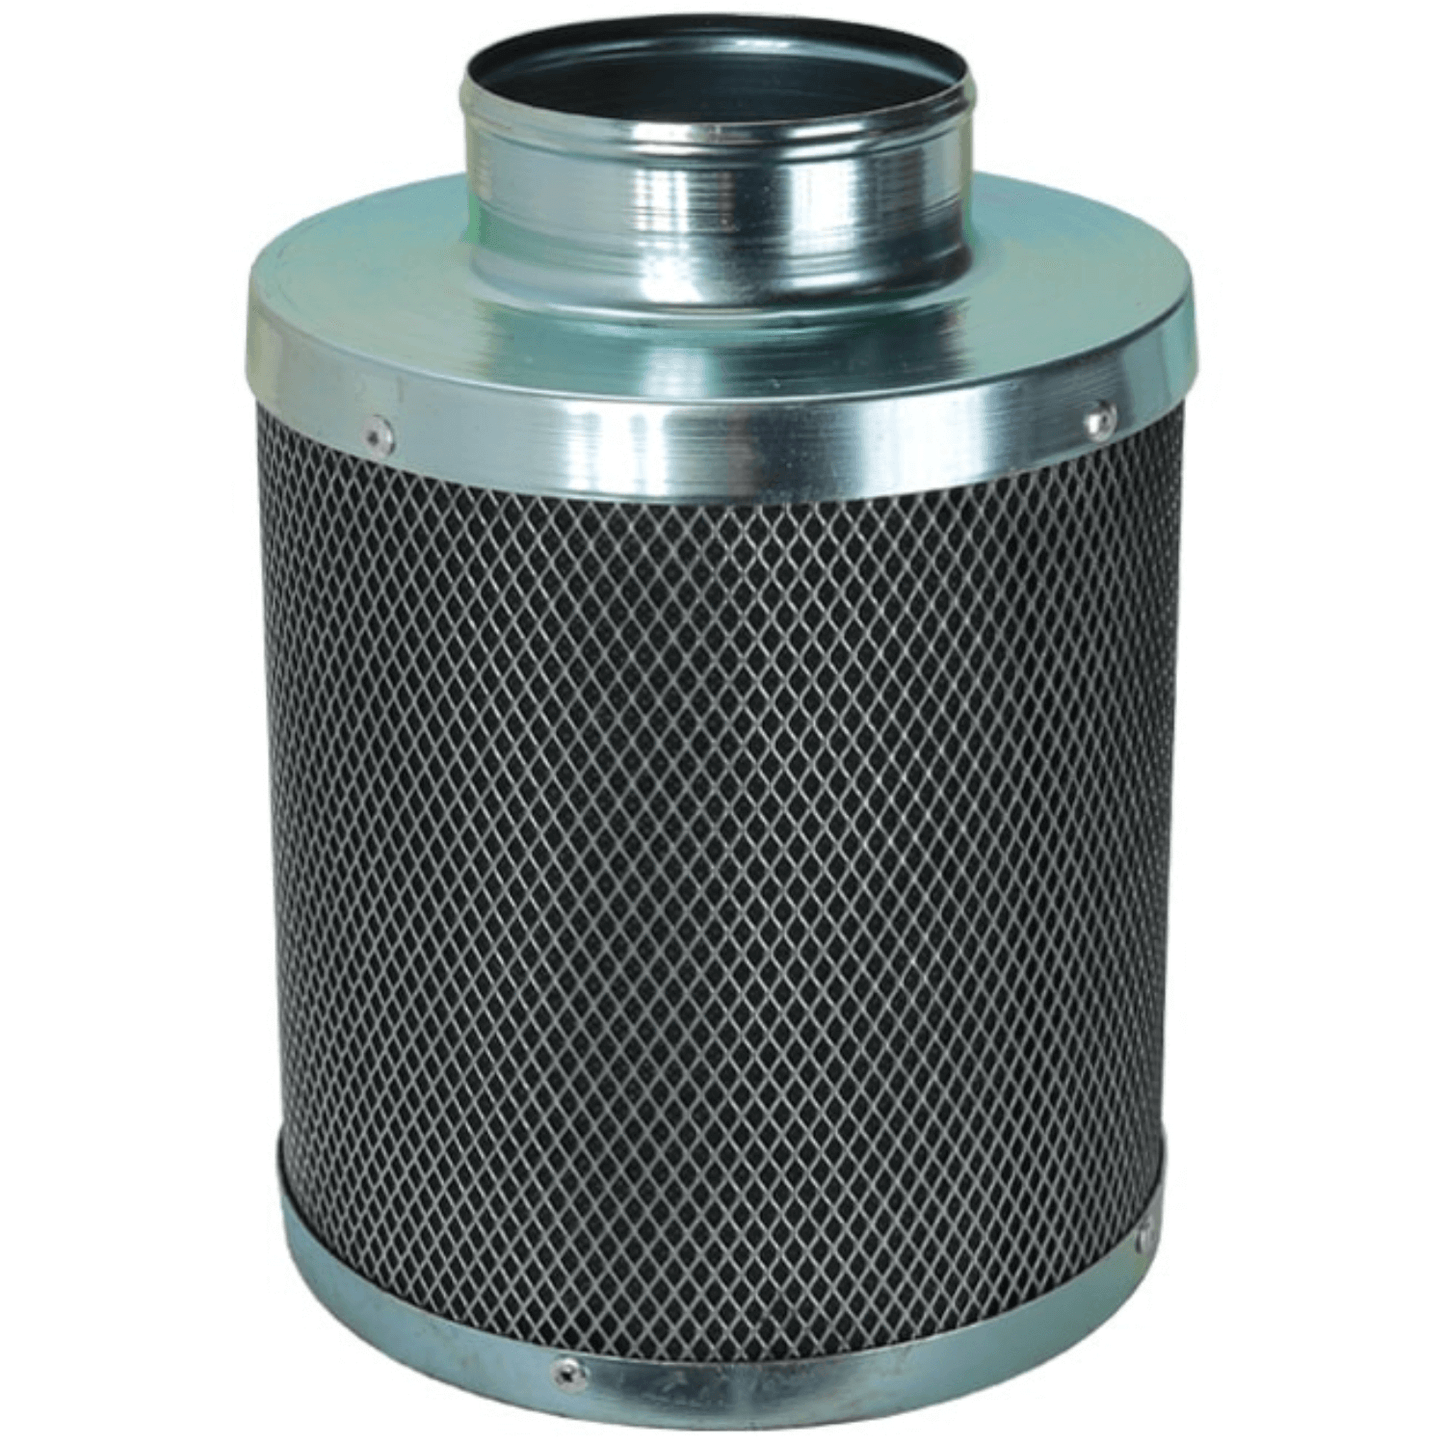 Charco Filters Plus 8" X 32" Activated Carbon Air Filter 971208-1 Climate Control 816731011969